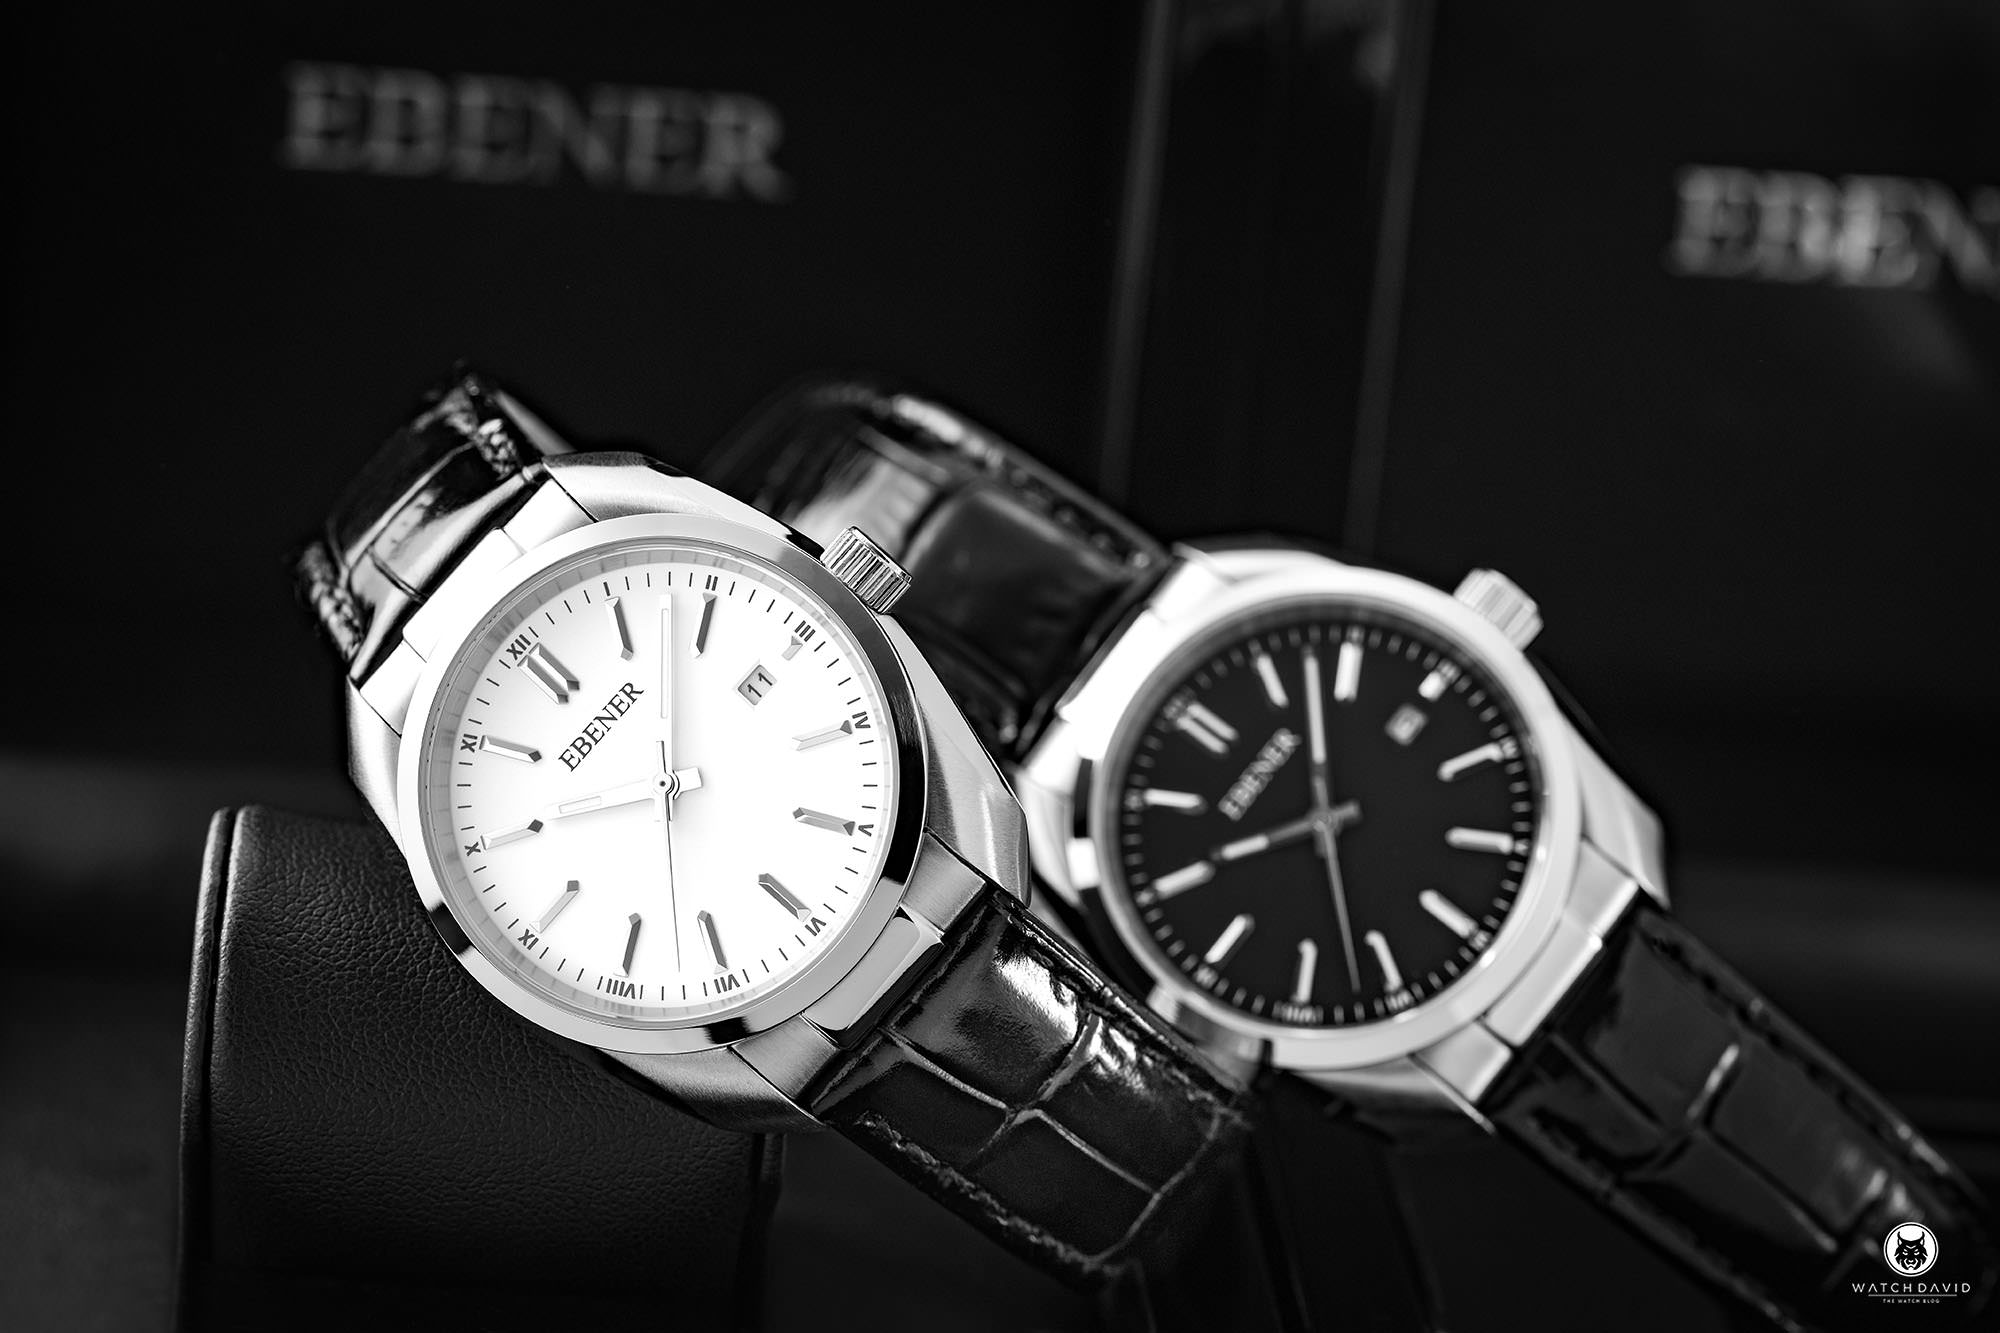 Ebener The First White Limited Edition